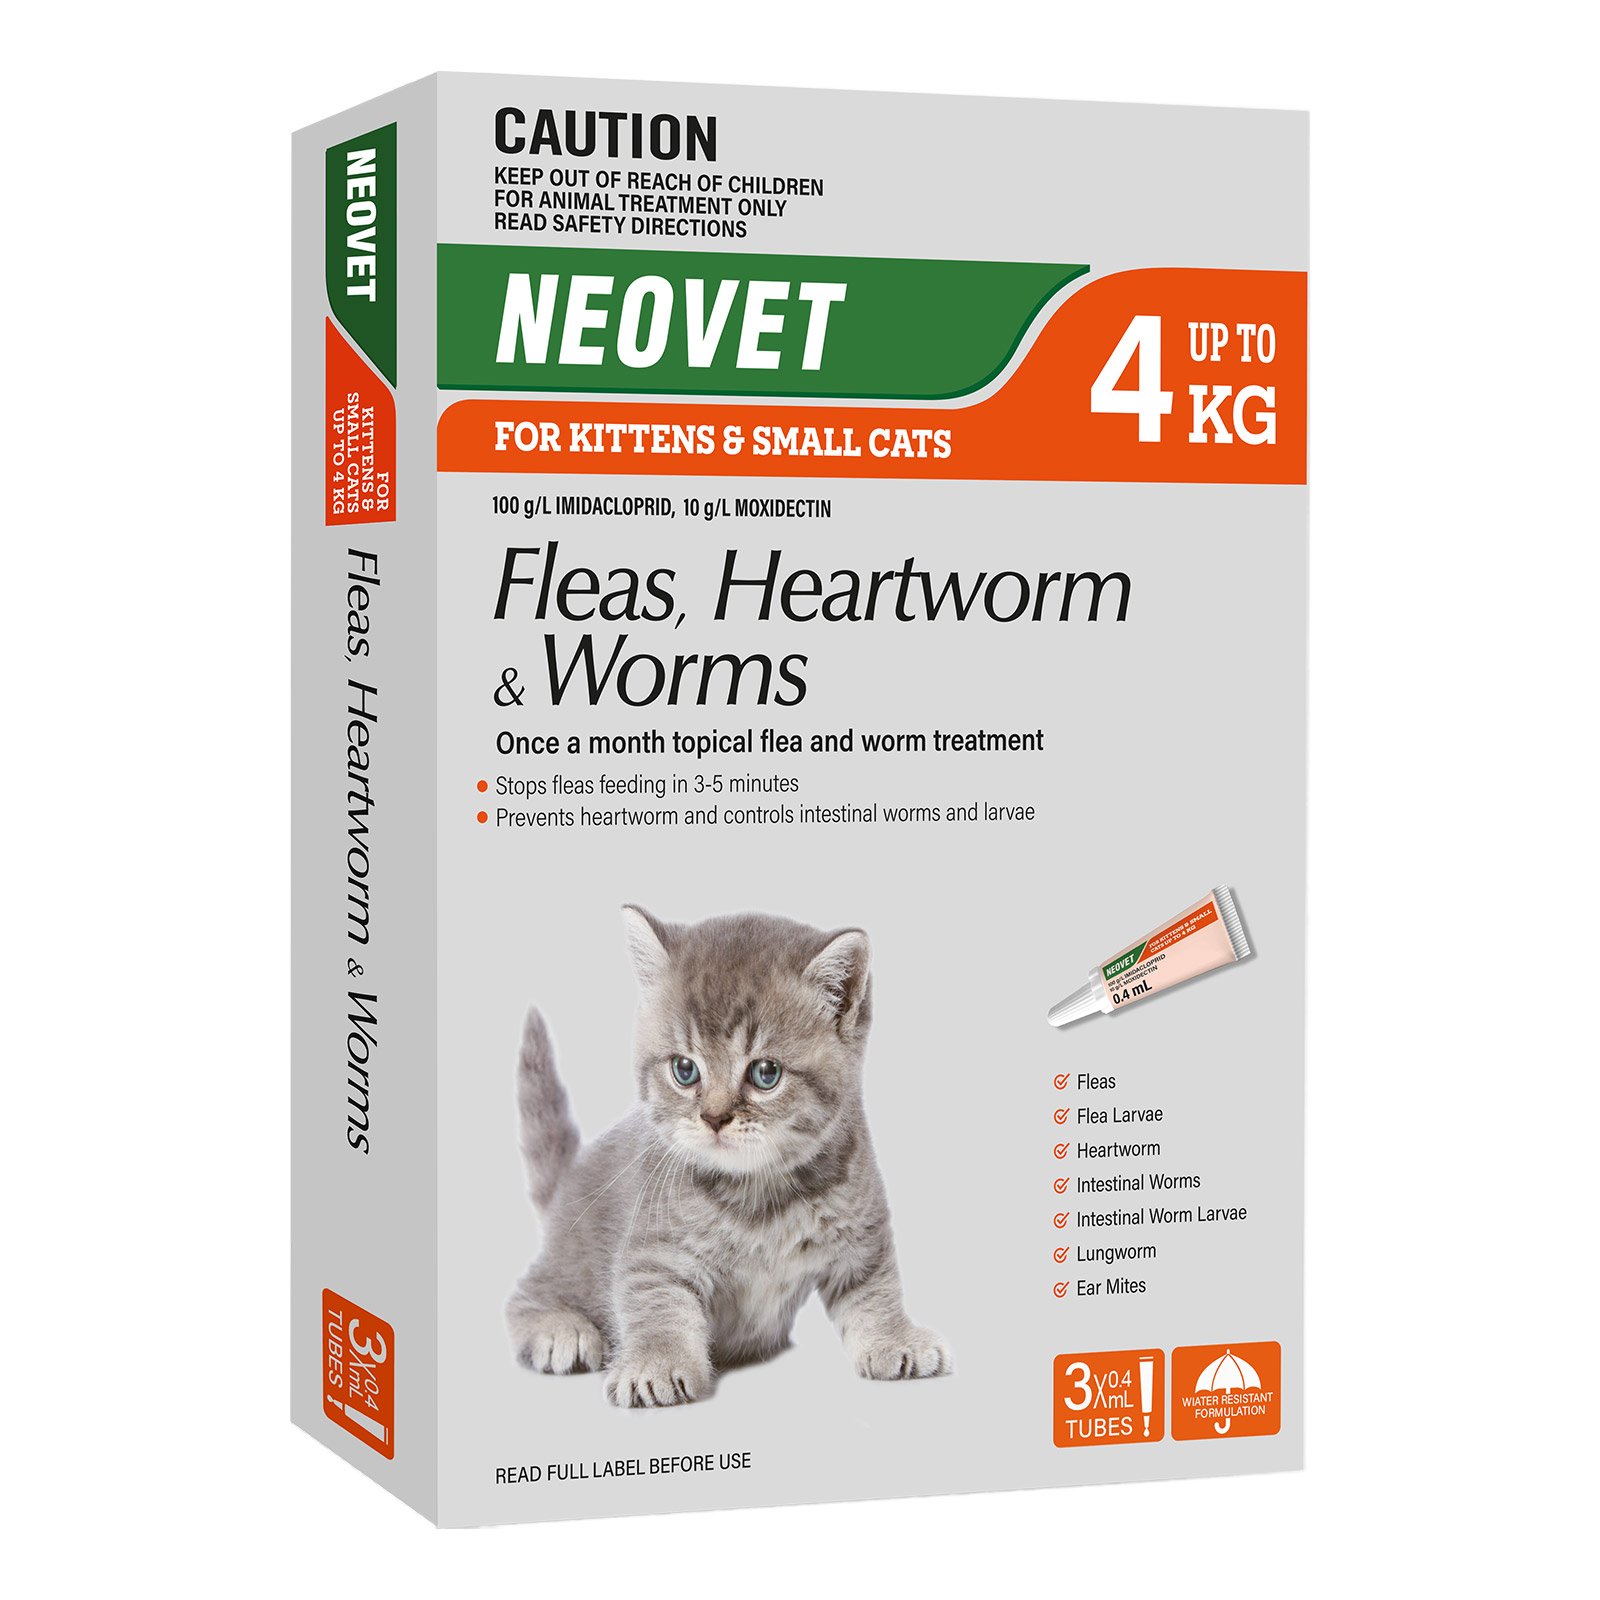 neovet-for-kittens-and-small-cats-up-to-4kg-3tubes_08102023_210933.jpg